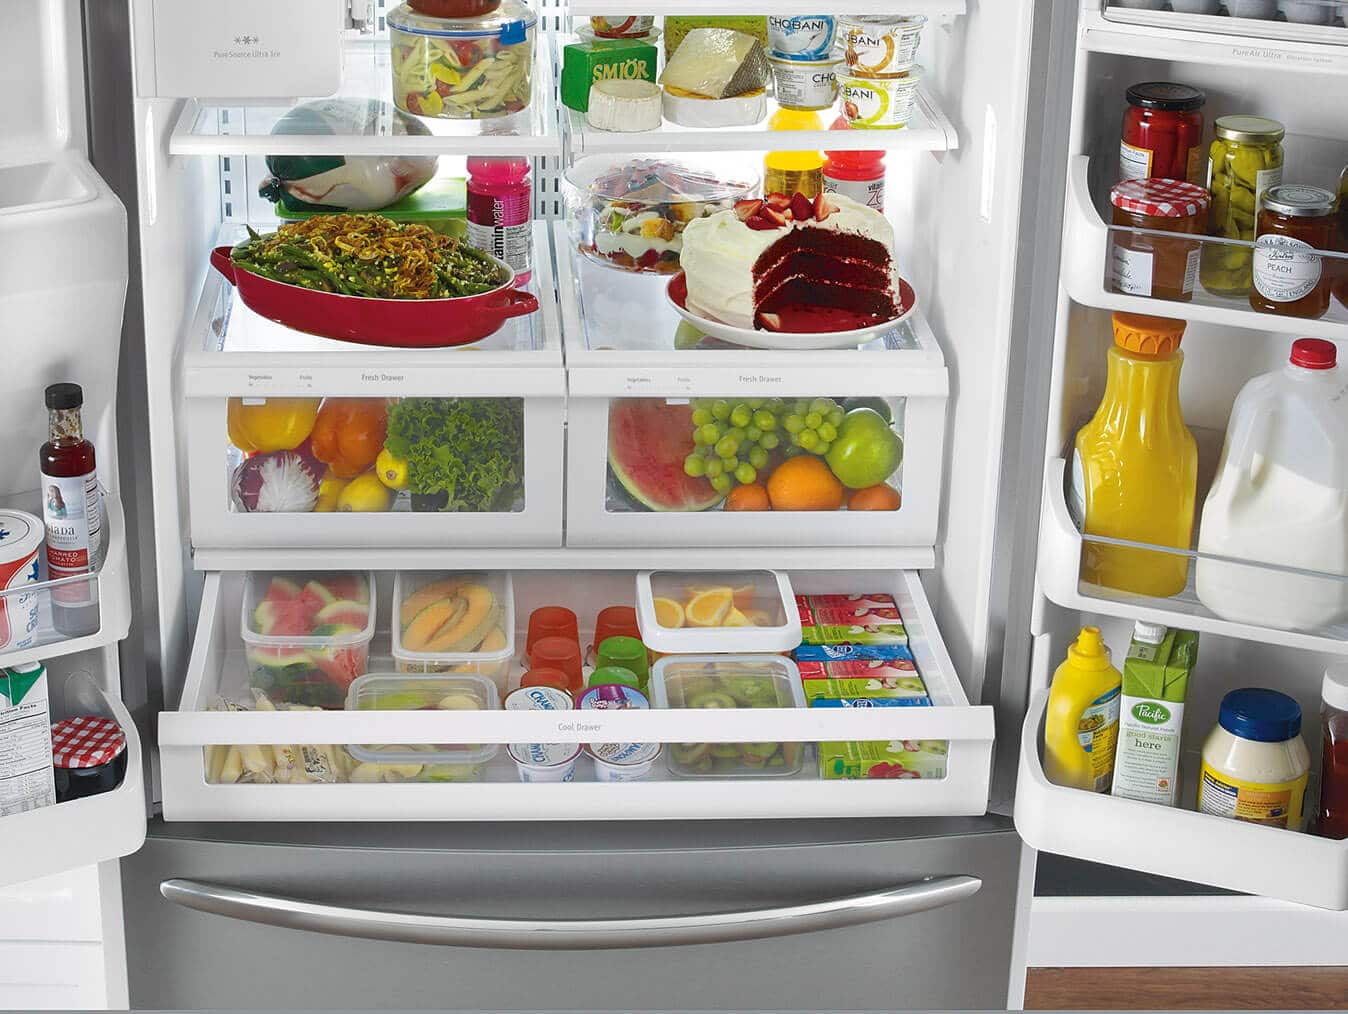 An open refrigerator filled with food.